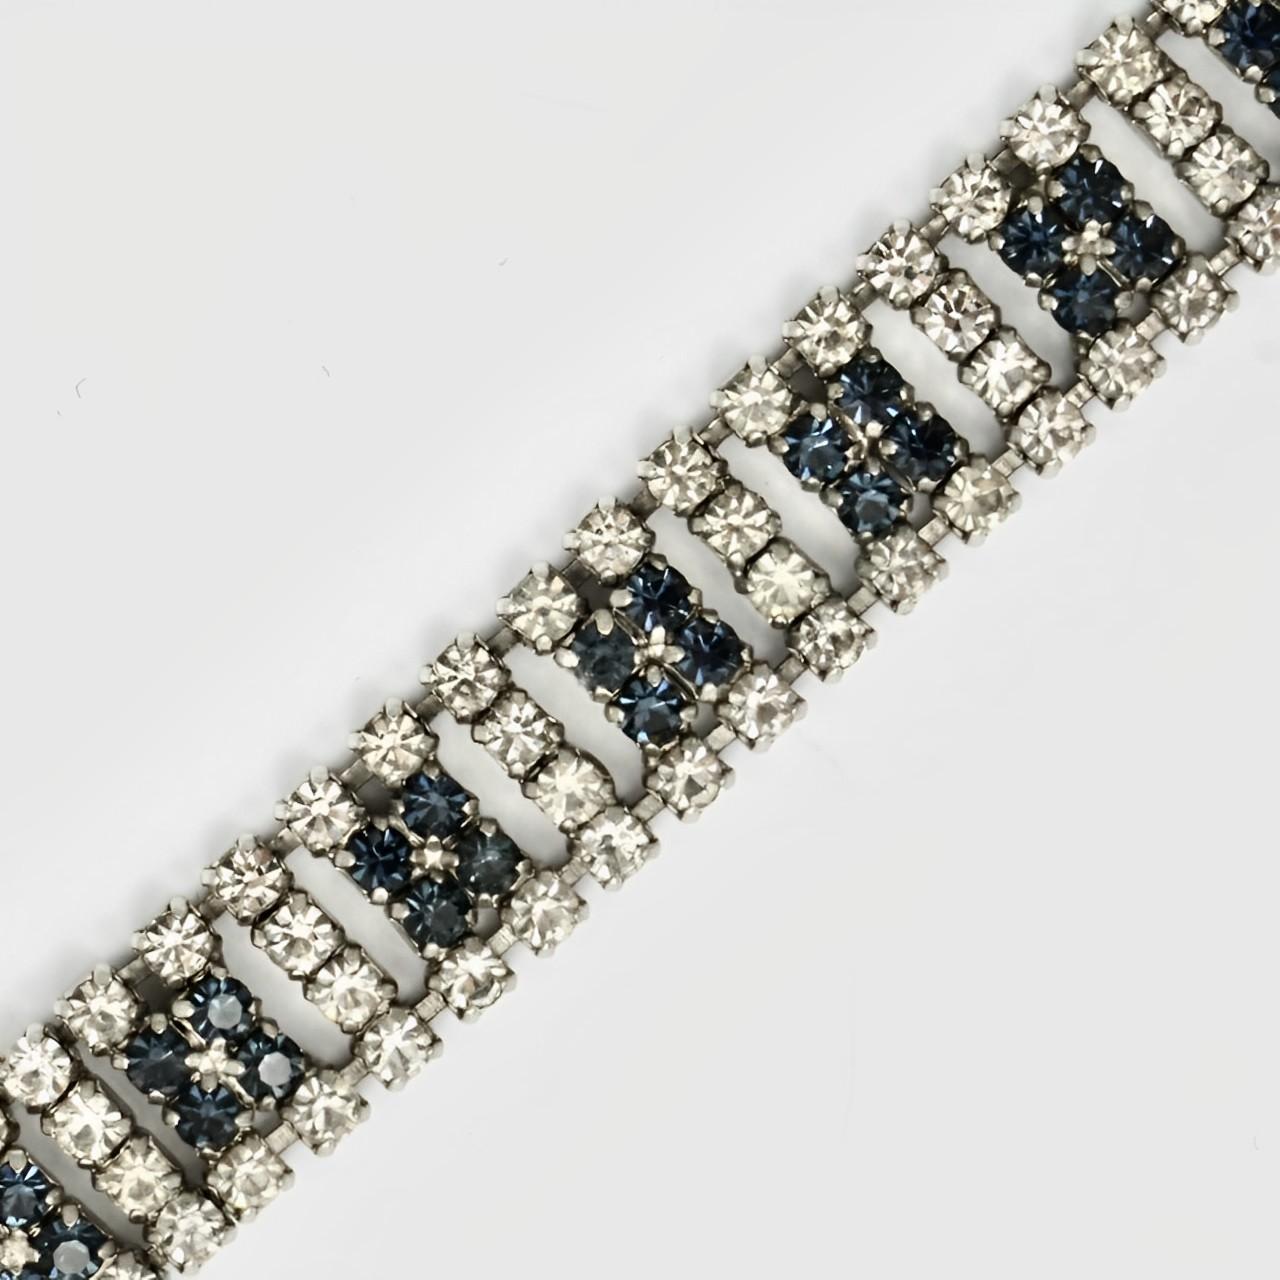 Lovely silver tone bracelet, with sparkling blue and clear rhinestones. Measuring length 17.3 cm / 6.8 inches by width 1.25 cm / .49 inch. There is one replacement rhinestone.

This is a beautiful vintage bracelet for the evening or a special